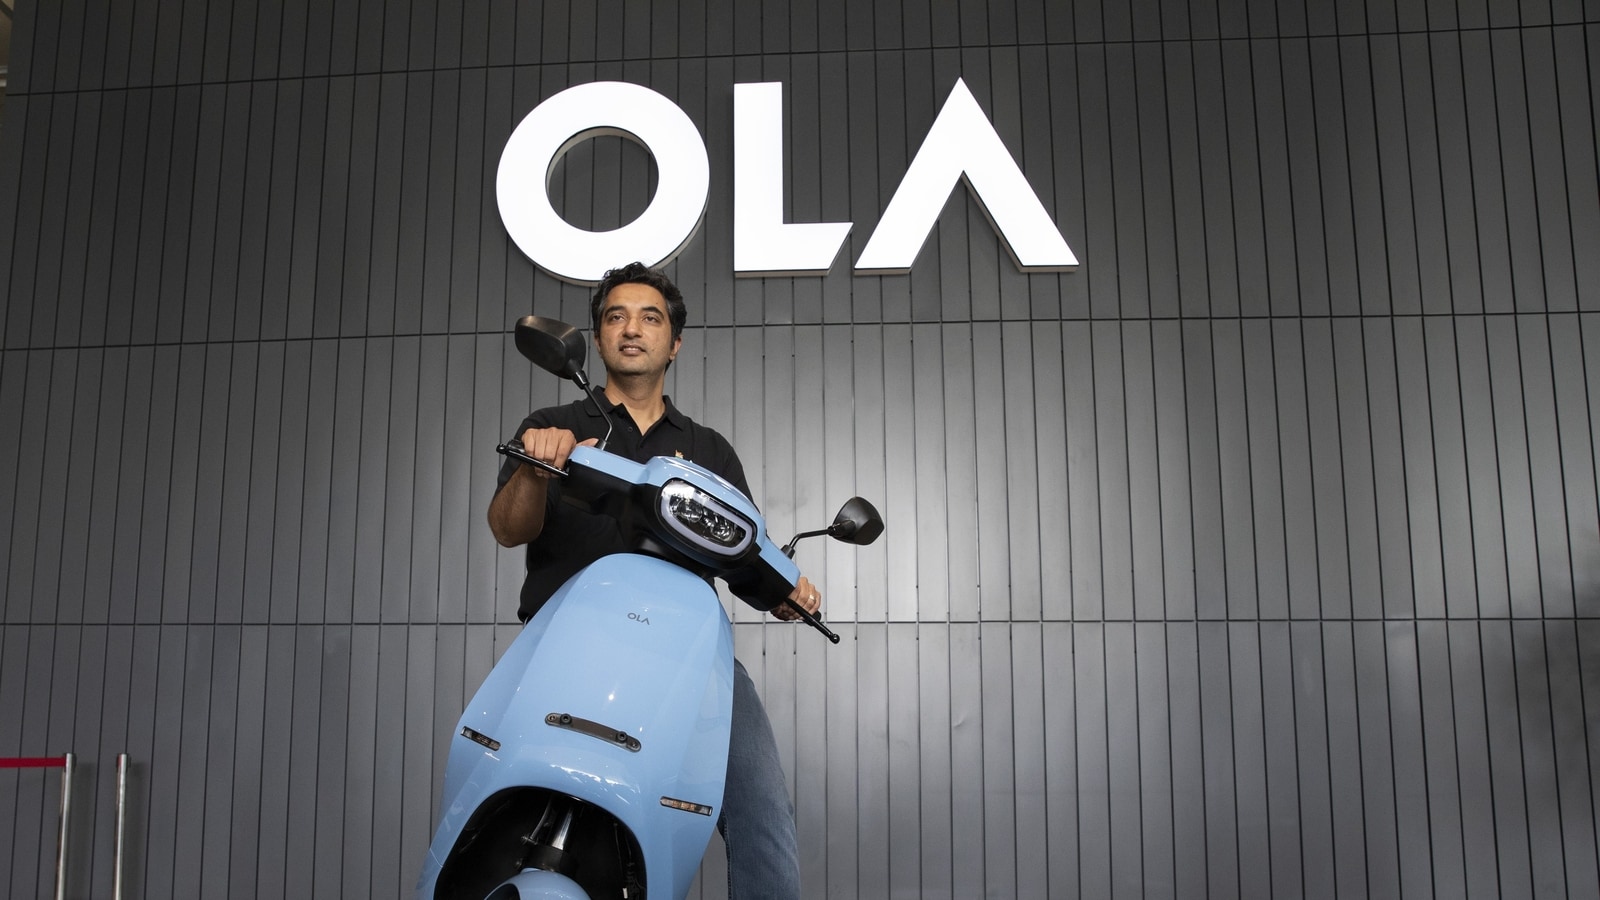 ‘Toxic’ work culture at Ola? ‘We’re not here to have nice easy time’, says CEO